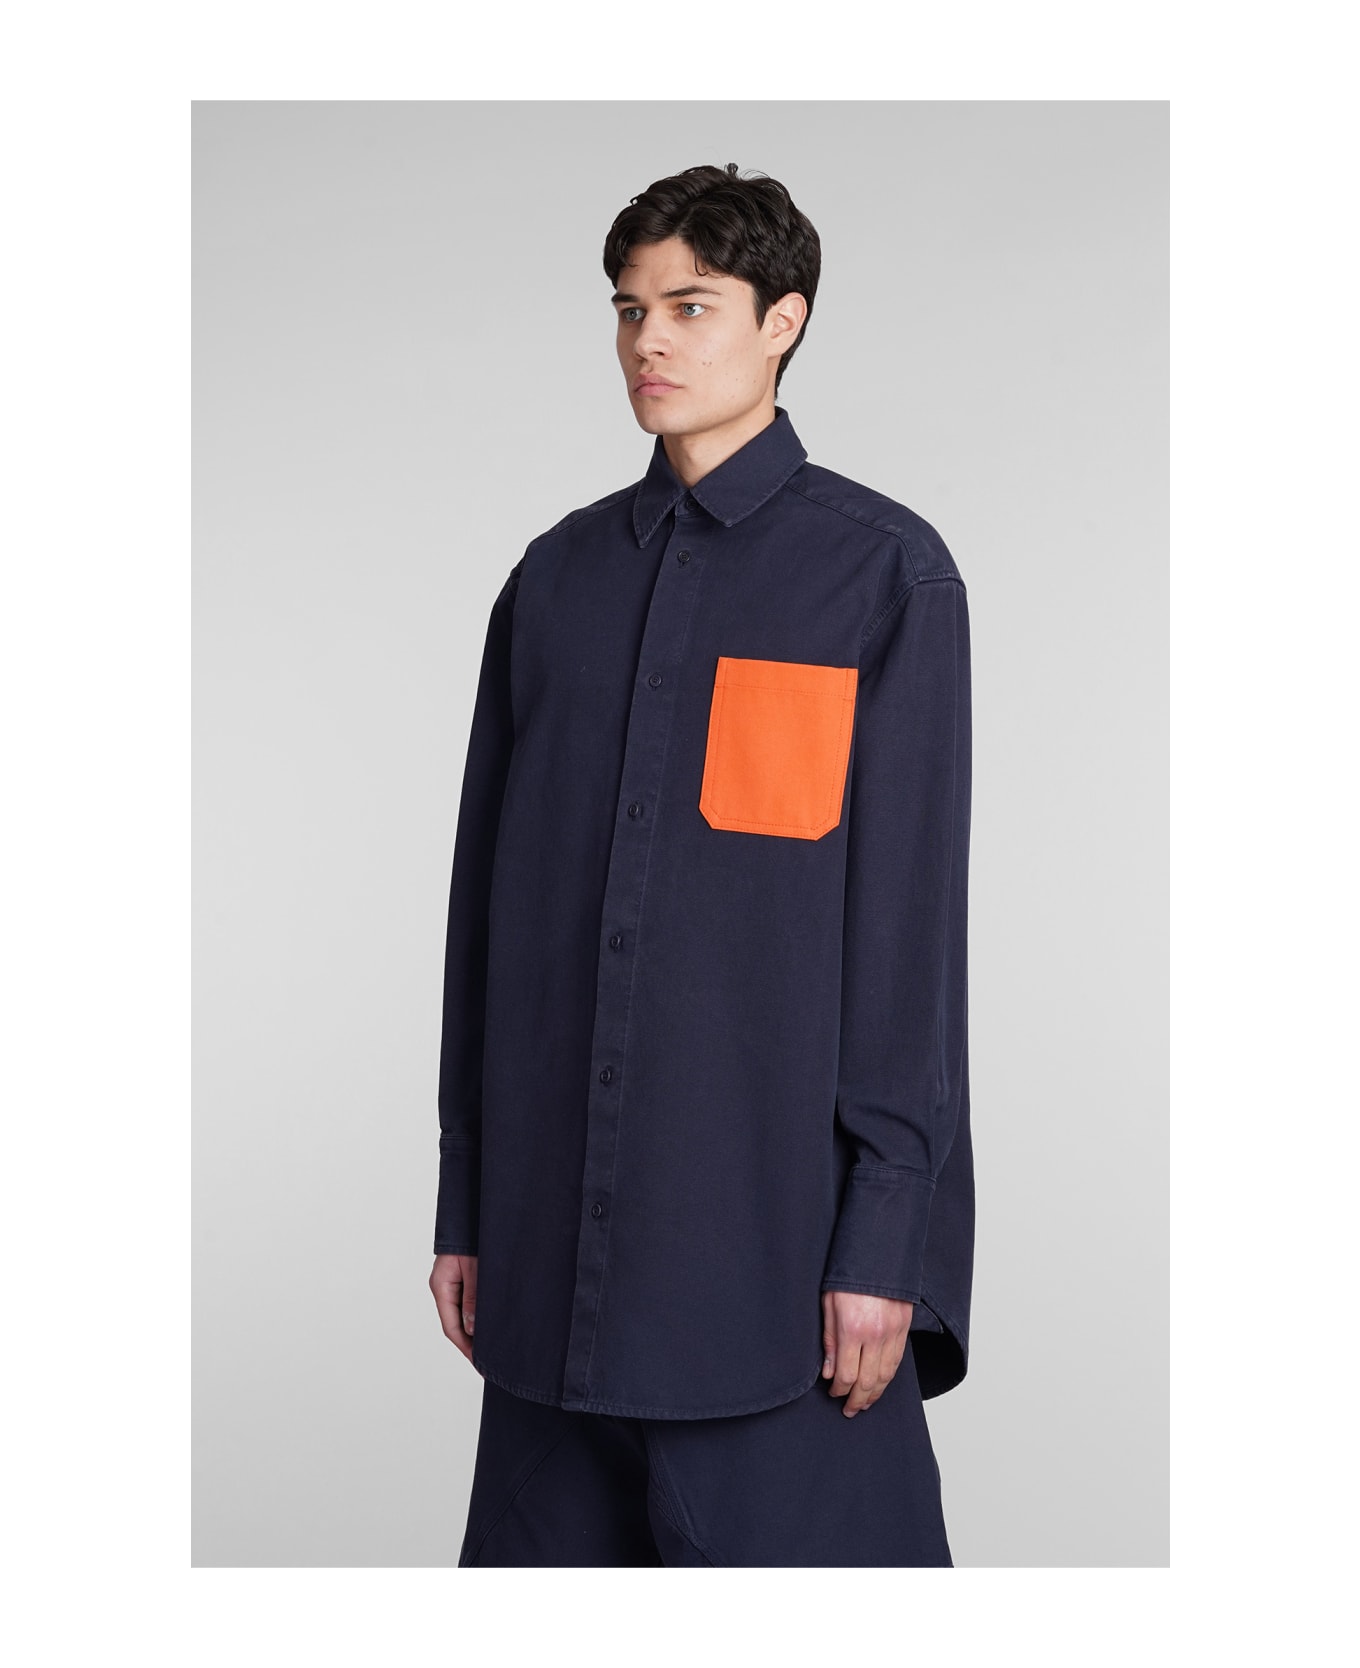 J.W. Anderson Shirt In Blue Cotton - Navy